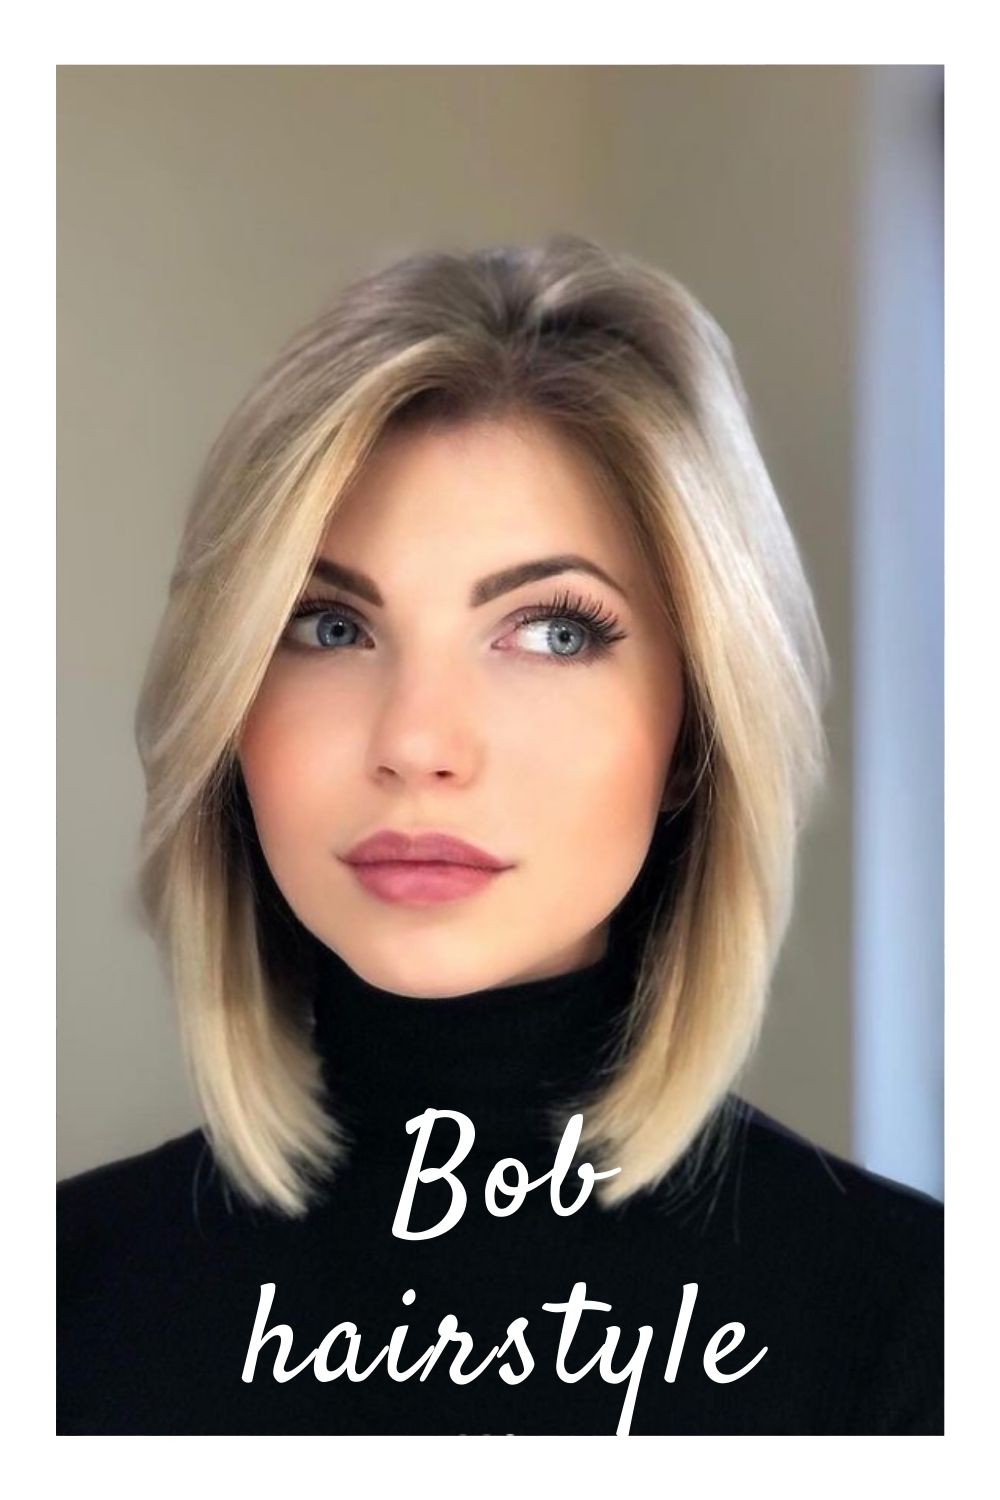 27 Best Bob Short Hair and Hairstyles for Women 2021